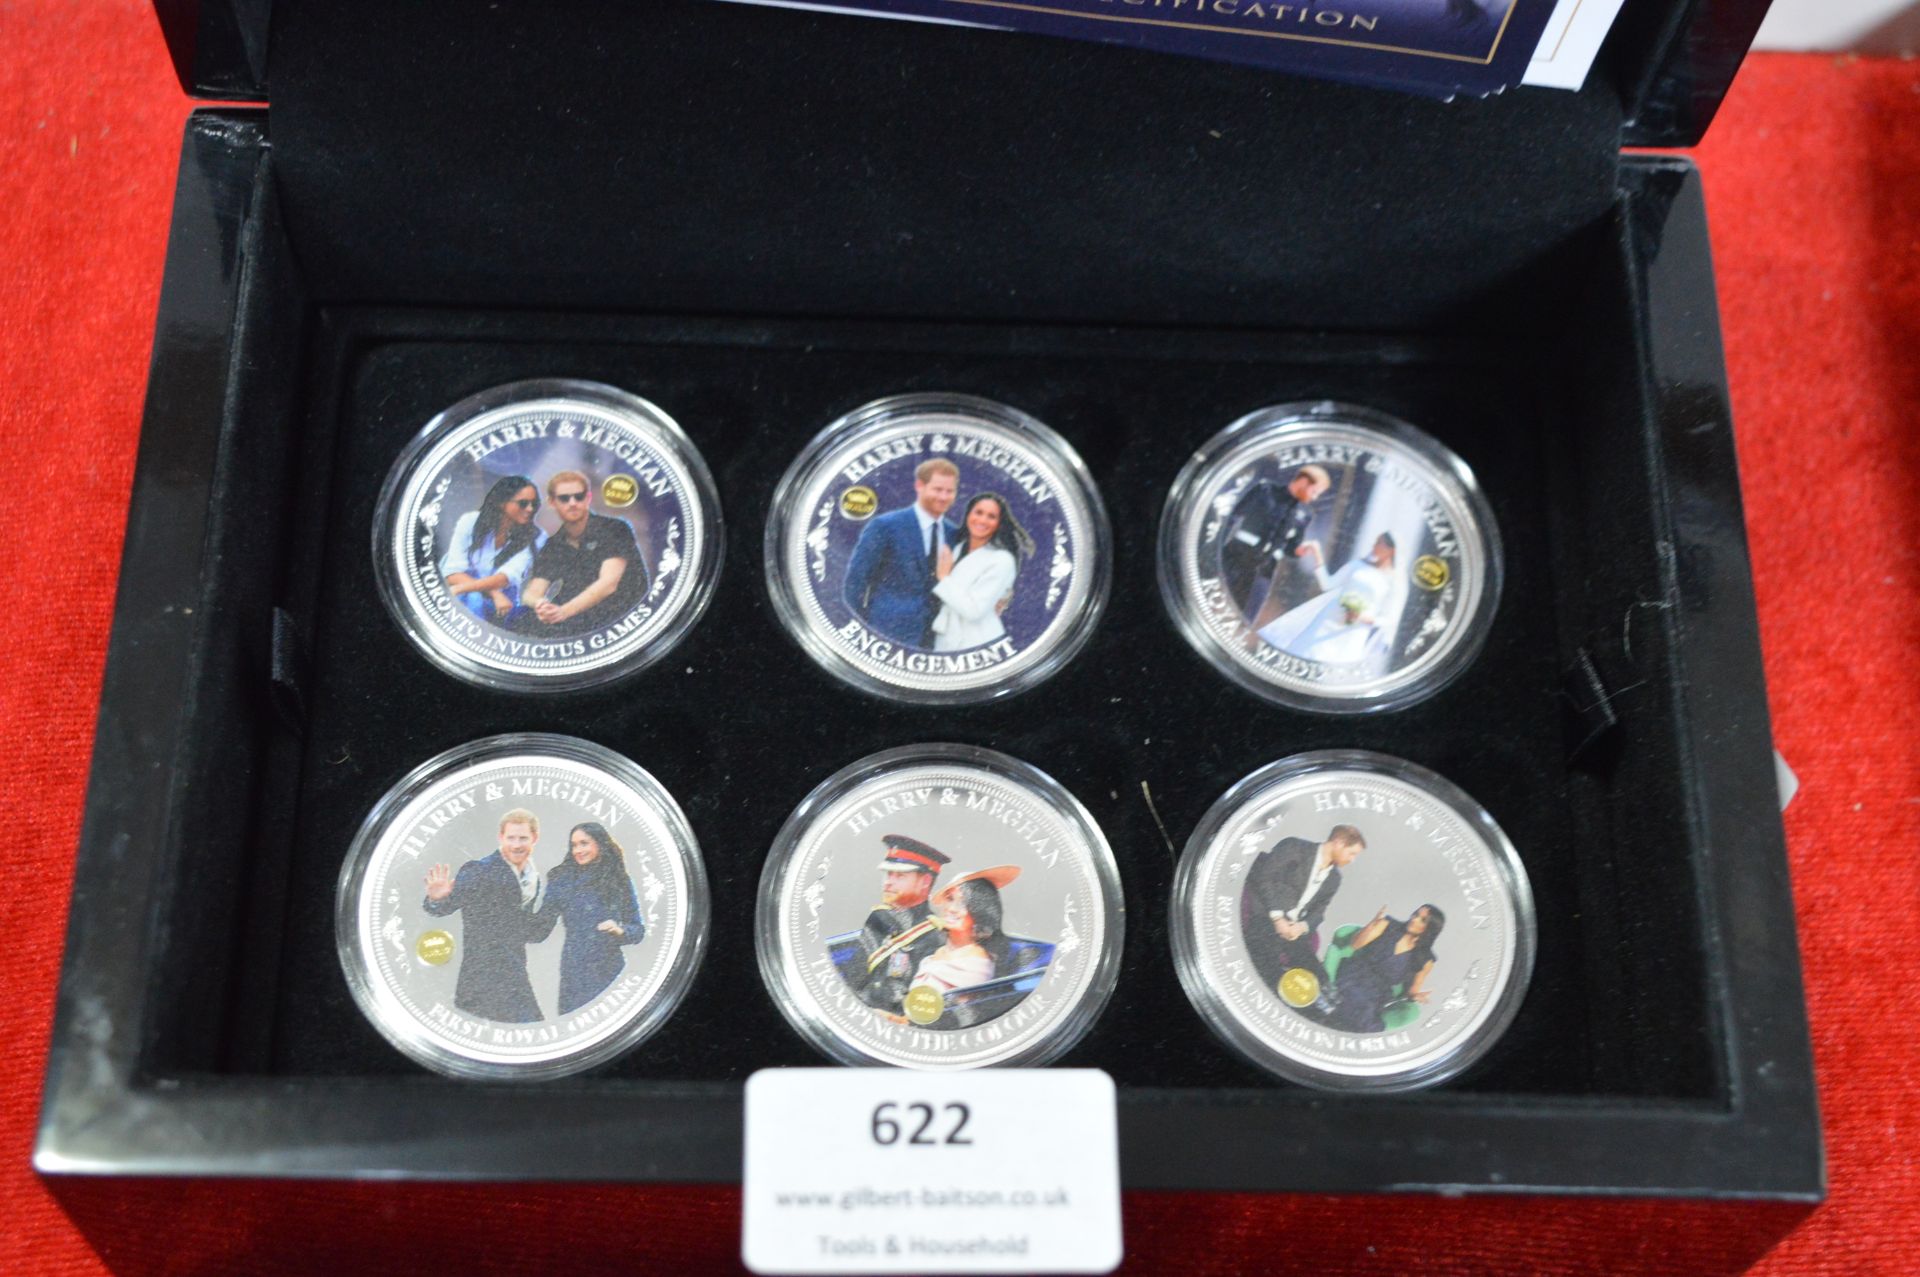 Boxed Cased Set of Six Pictorial Harry & Megan Royal Wedding Coins - Image 2 of 2